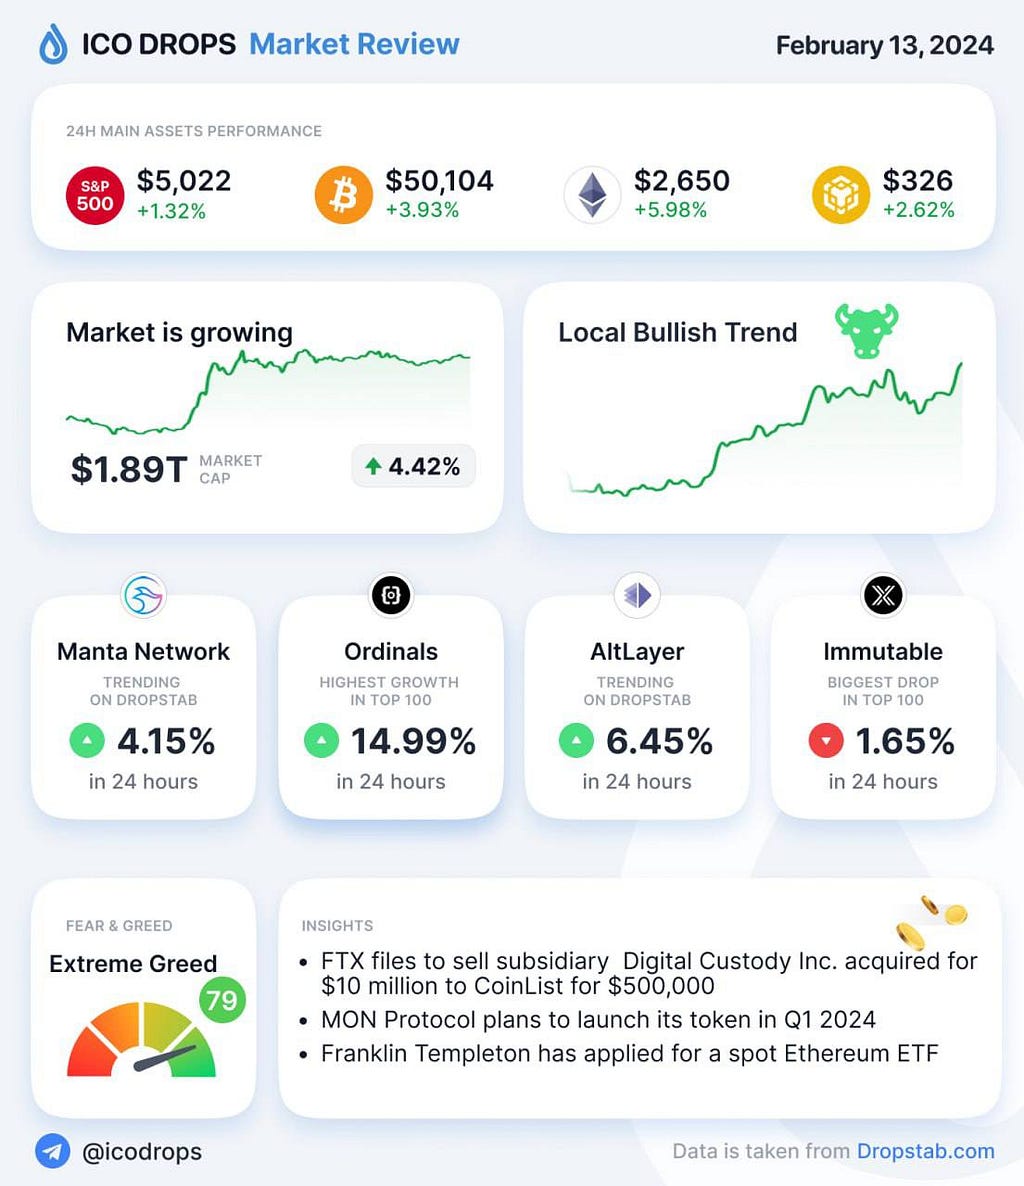 Market review shows asset growth, market cap increase, and a bullish trend. Trends include Manta Network’s and Ordinals’ growth, AltLayer’s rise, and Immutable’s drop. The sentiment is “Extreme Greed”. Insights cover FTX’s subsidiary sale, MON Protocol’s token launch, and Franklin Templeton’s ETF application.